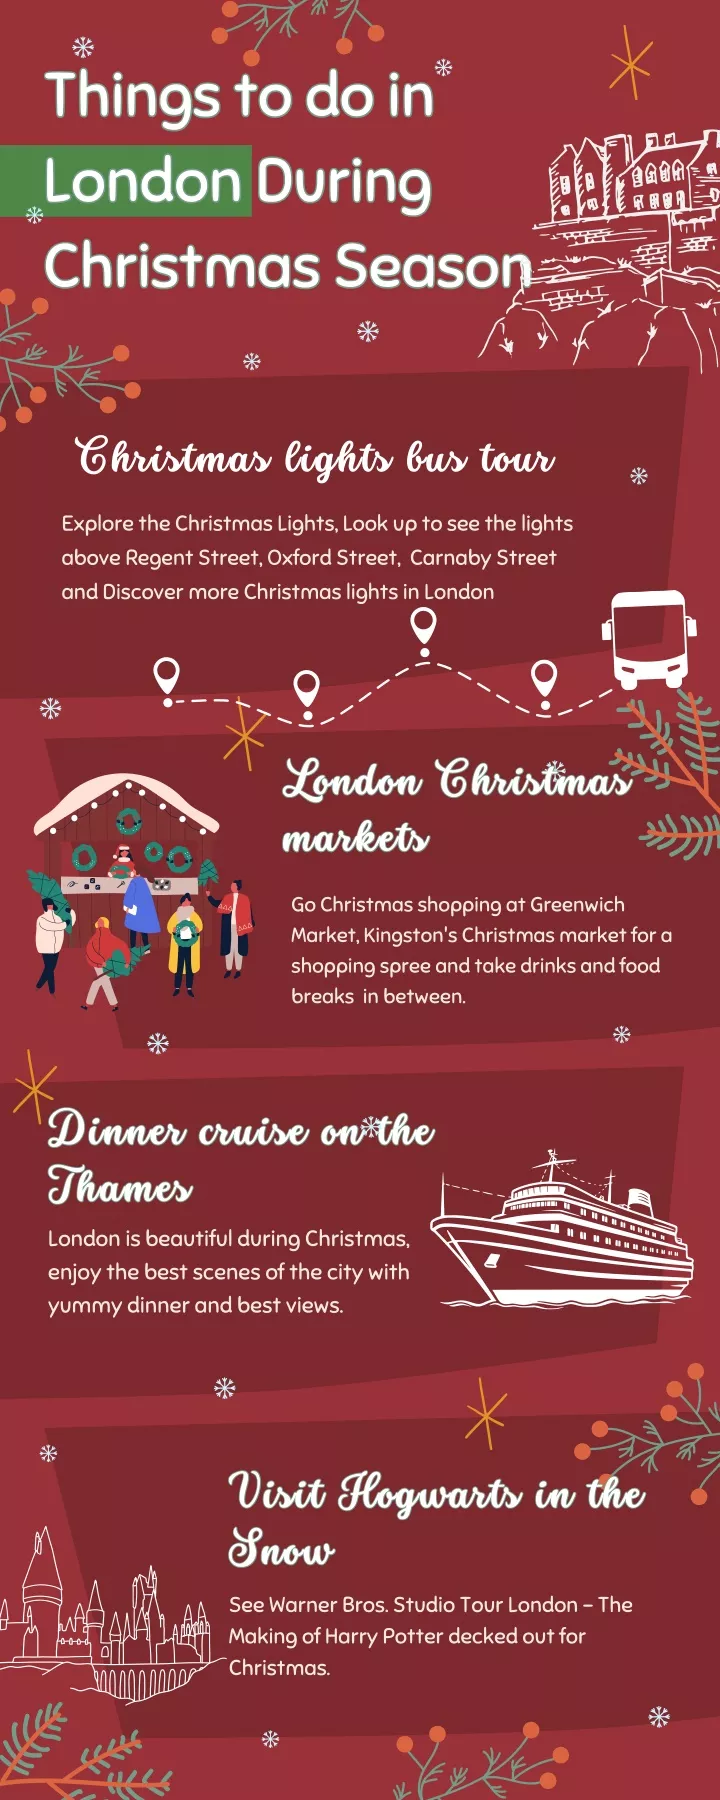 things to do in london during christmas season